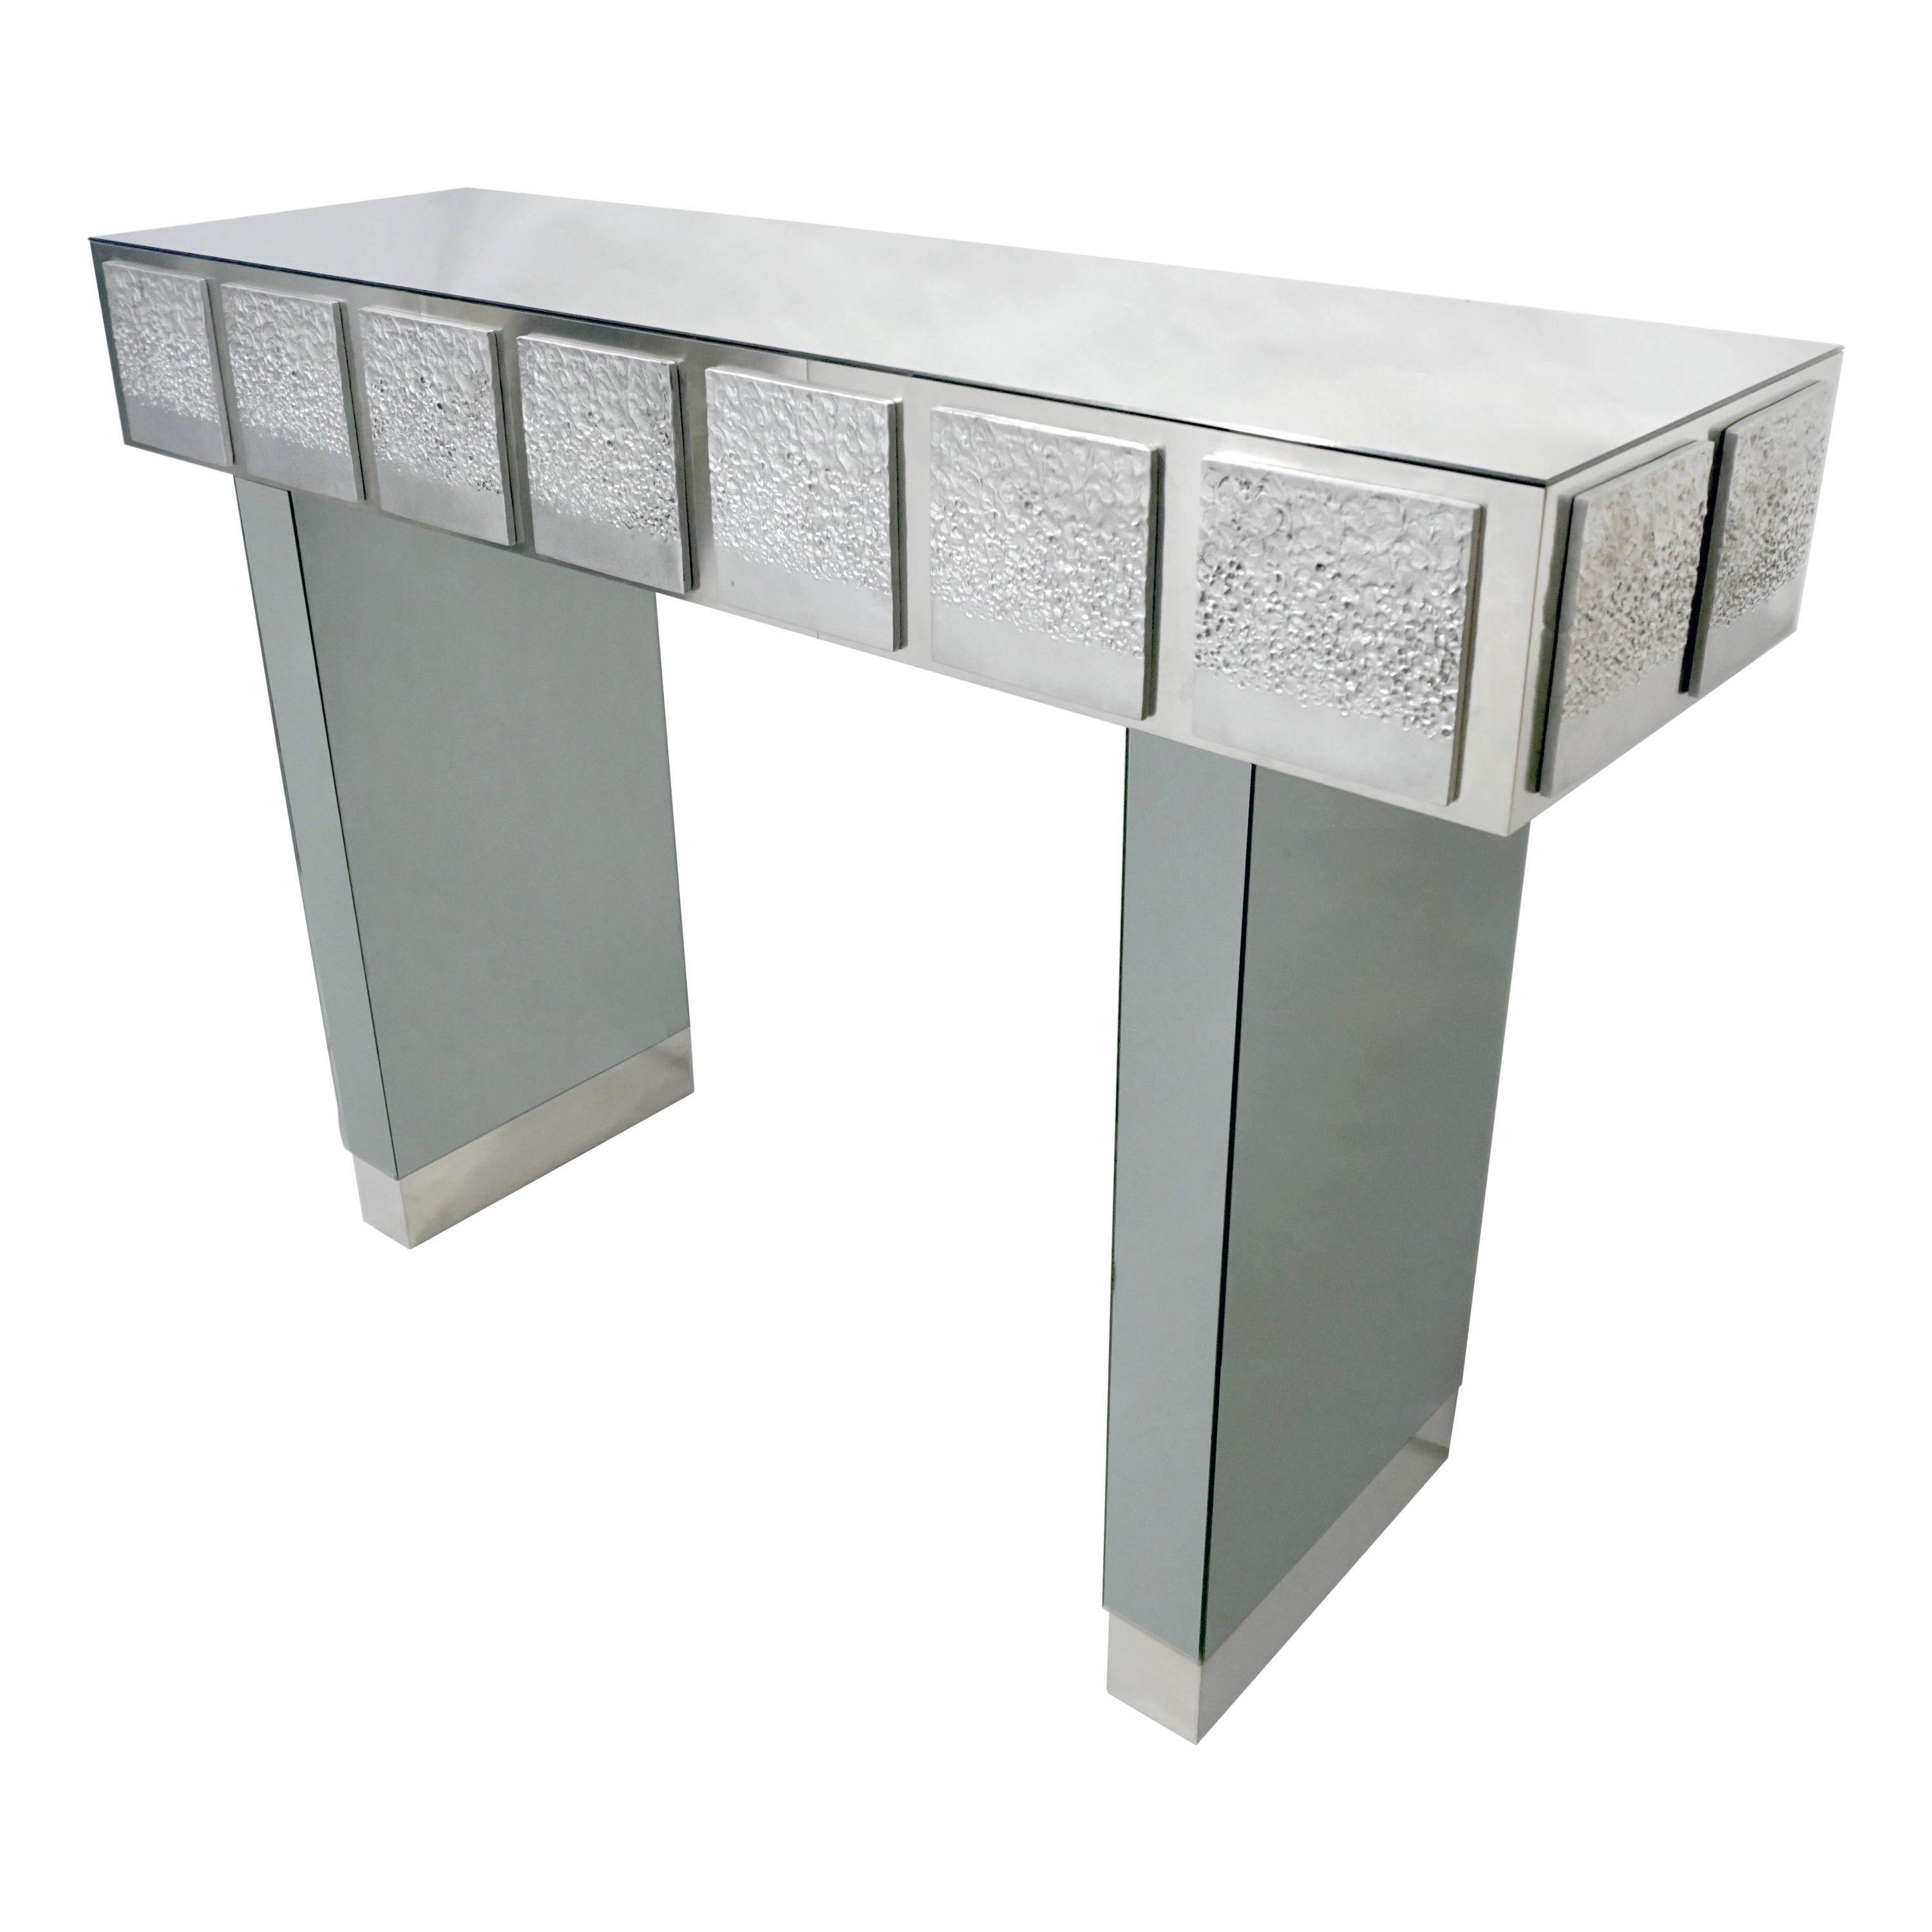 Bespoke Italian Contemporary One-of-a-Kind Polished Steel Smoked Mirror Console